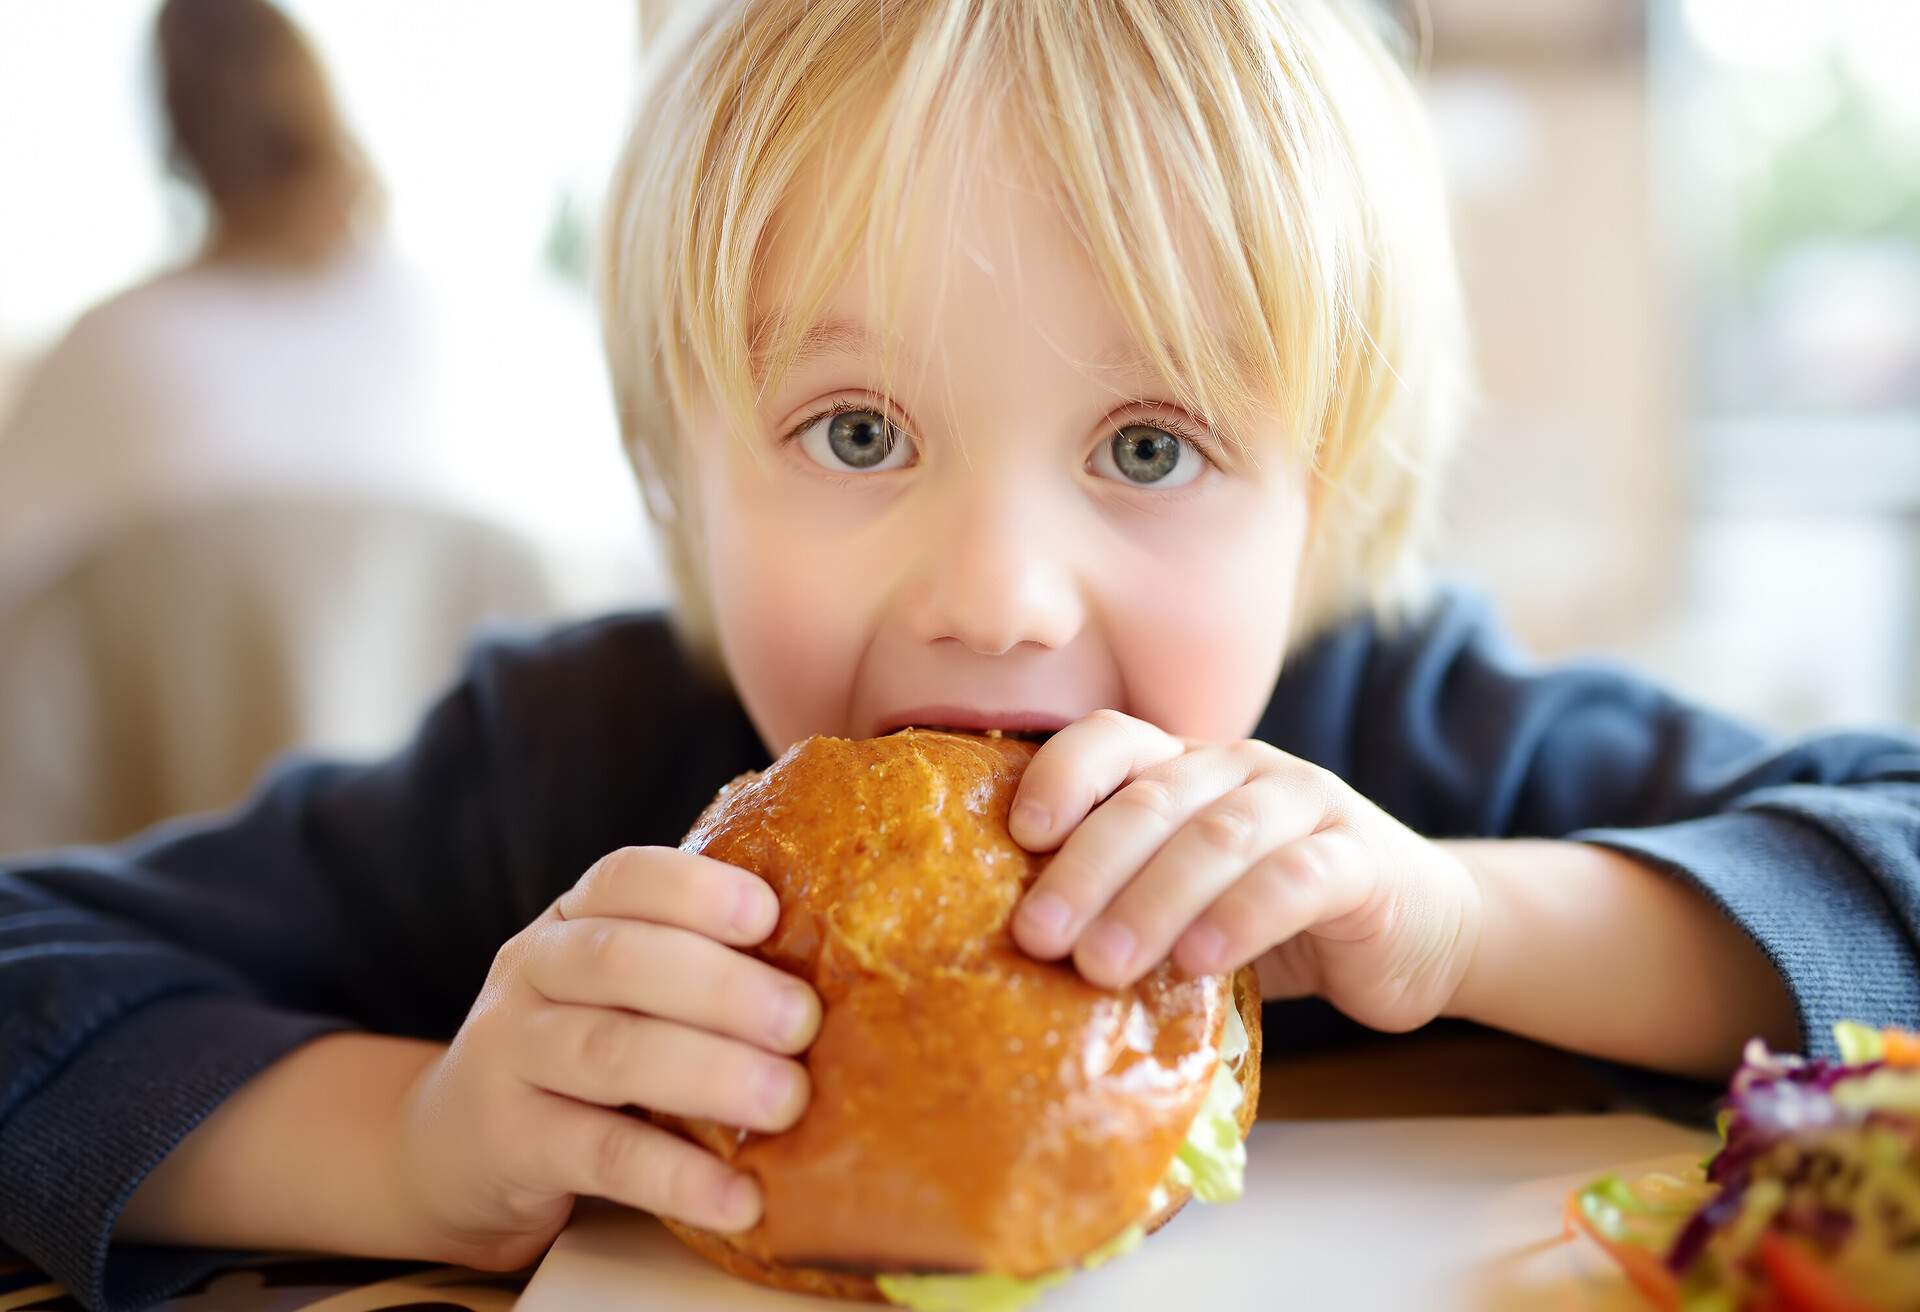 Cute blonde boy eating large hamburger at fast food restaurant. Unhealthy meal for kids. Junk food. Overweight problem child. 